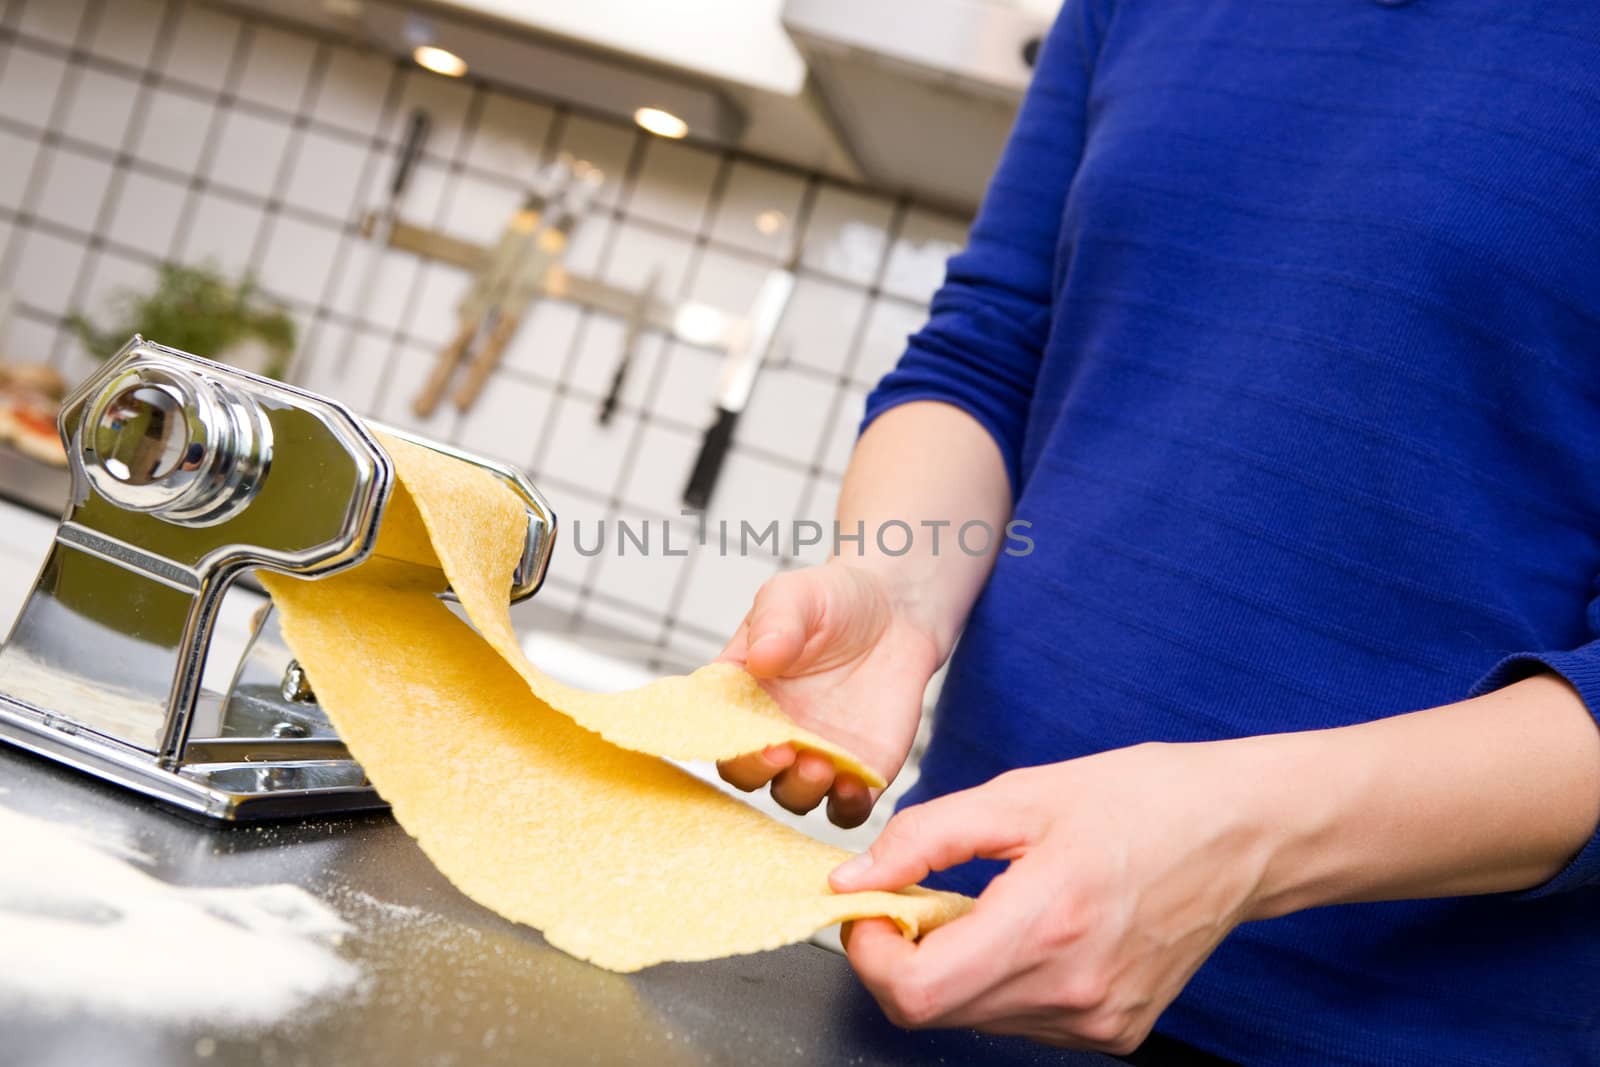 A young female stretching out pasta over the counter from a manual pasta machine at home in the kitchen.